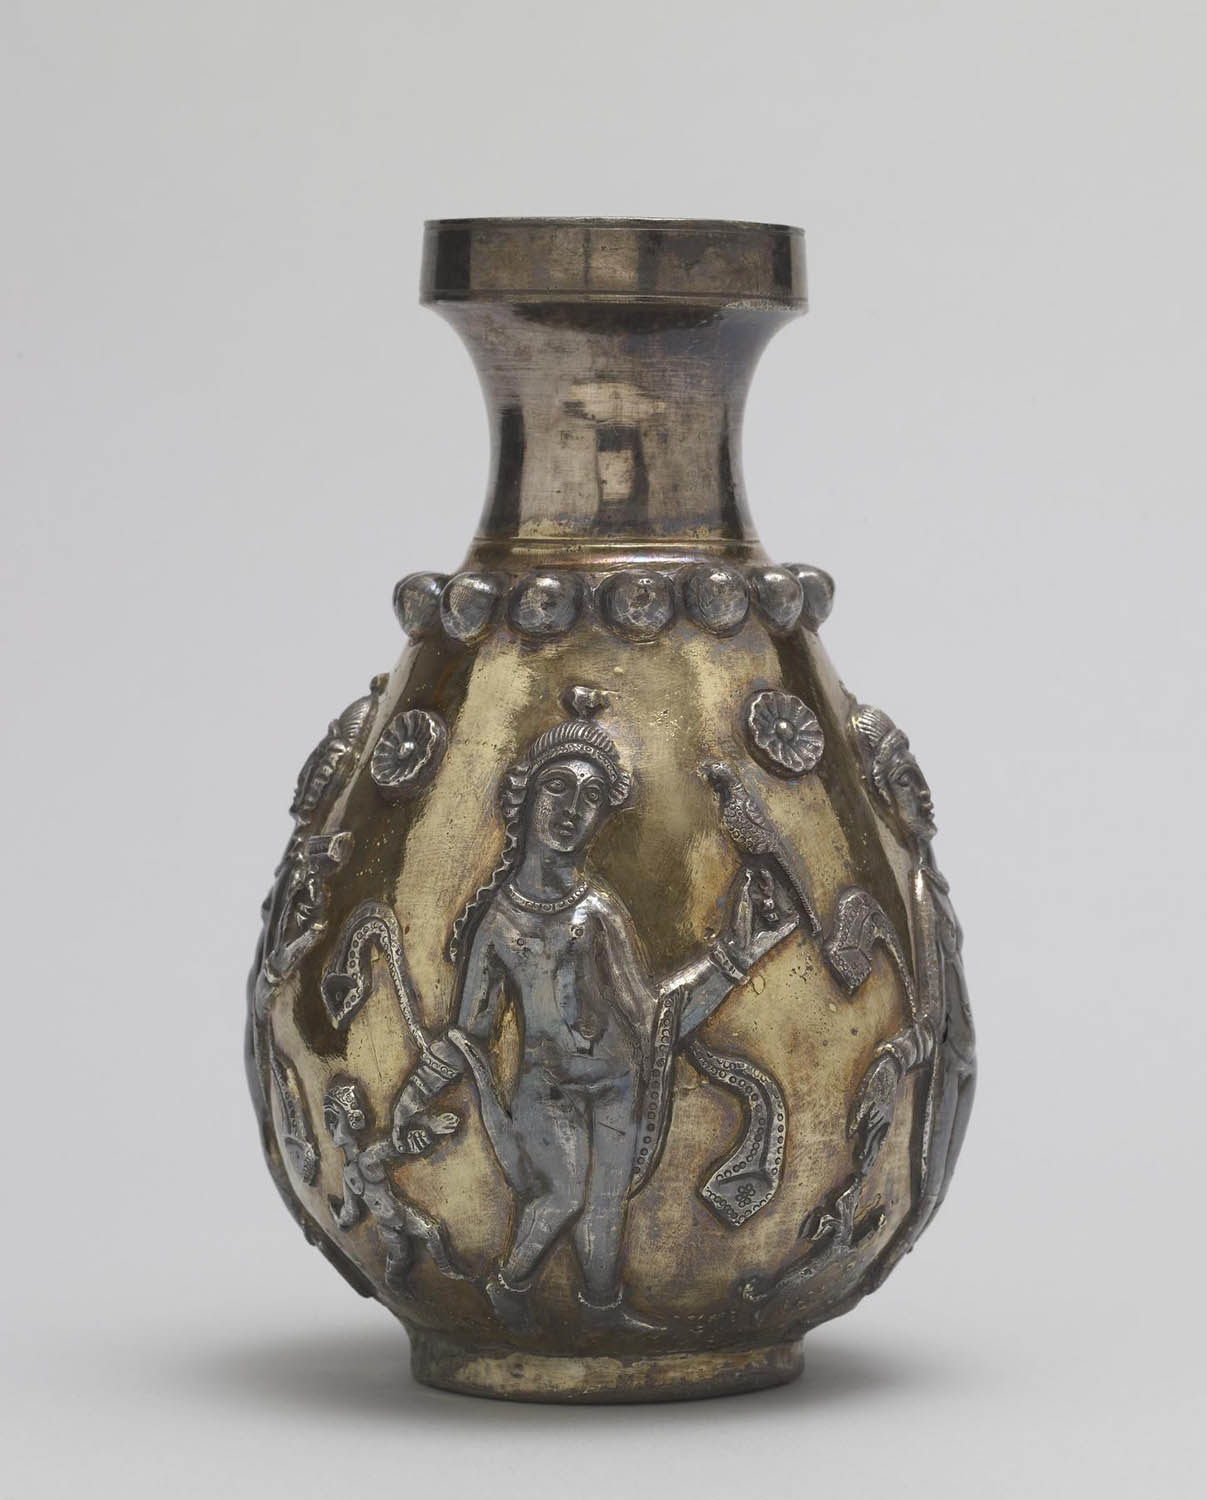 A bottle with sculptural figures of humans and animals, as well as floral details.